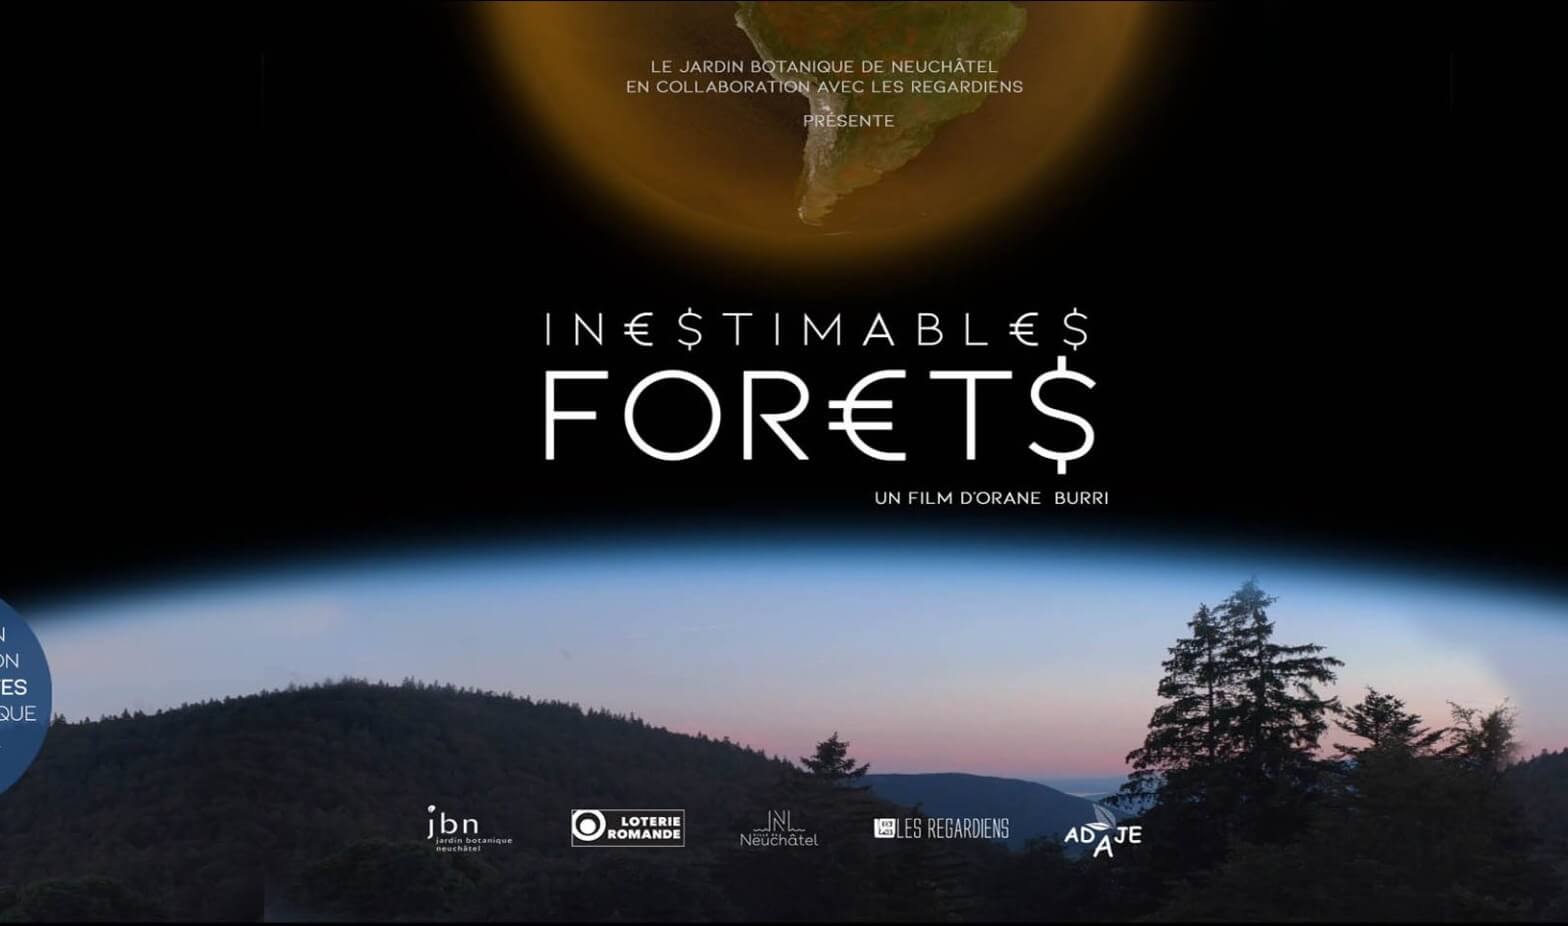 INESTIMABLES FORETS site light